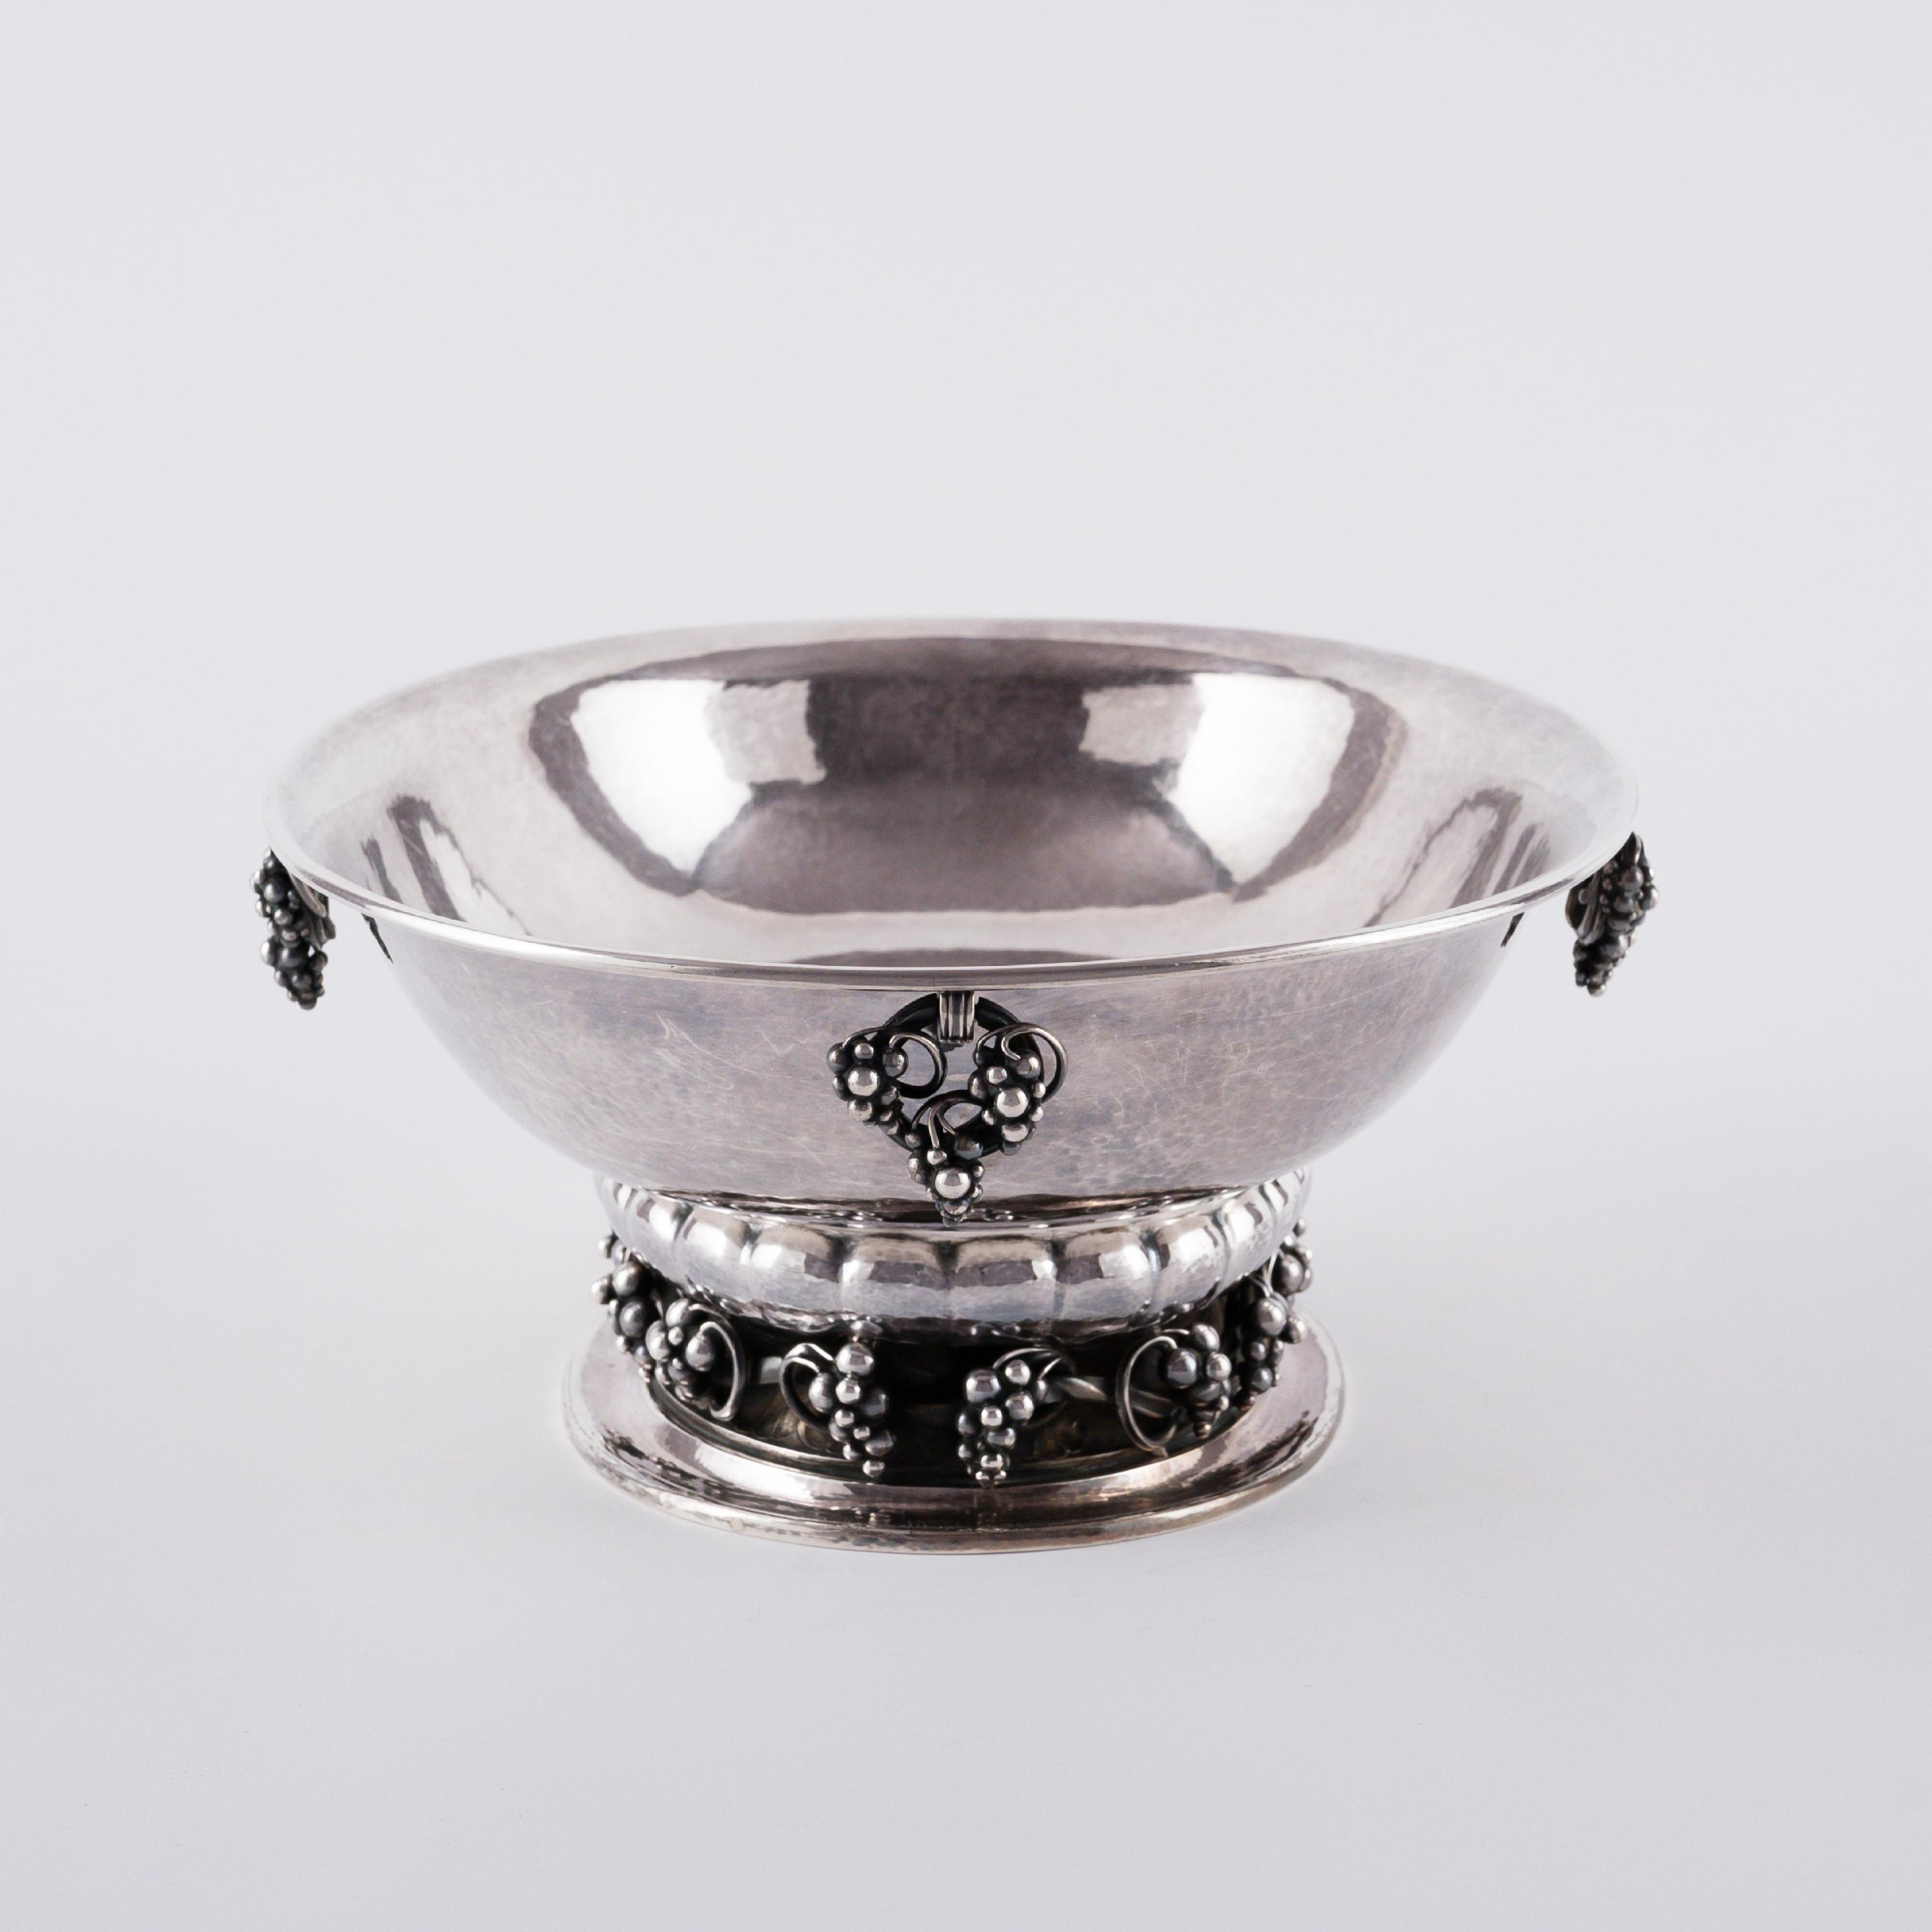 LARGE SILVER FOOTED BOWL WITH GRAPE DECOR - Image 5 of 7